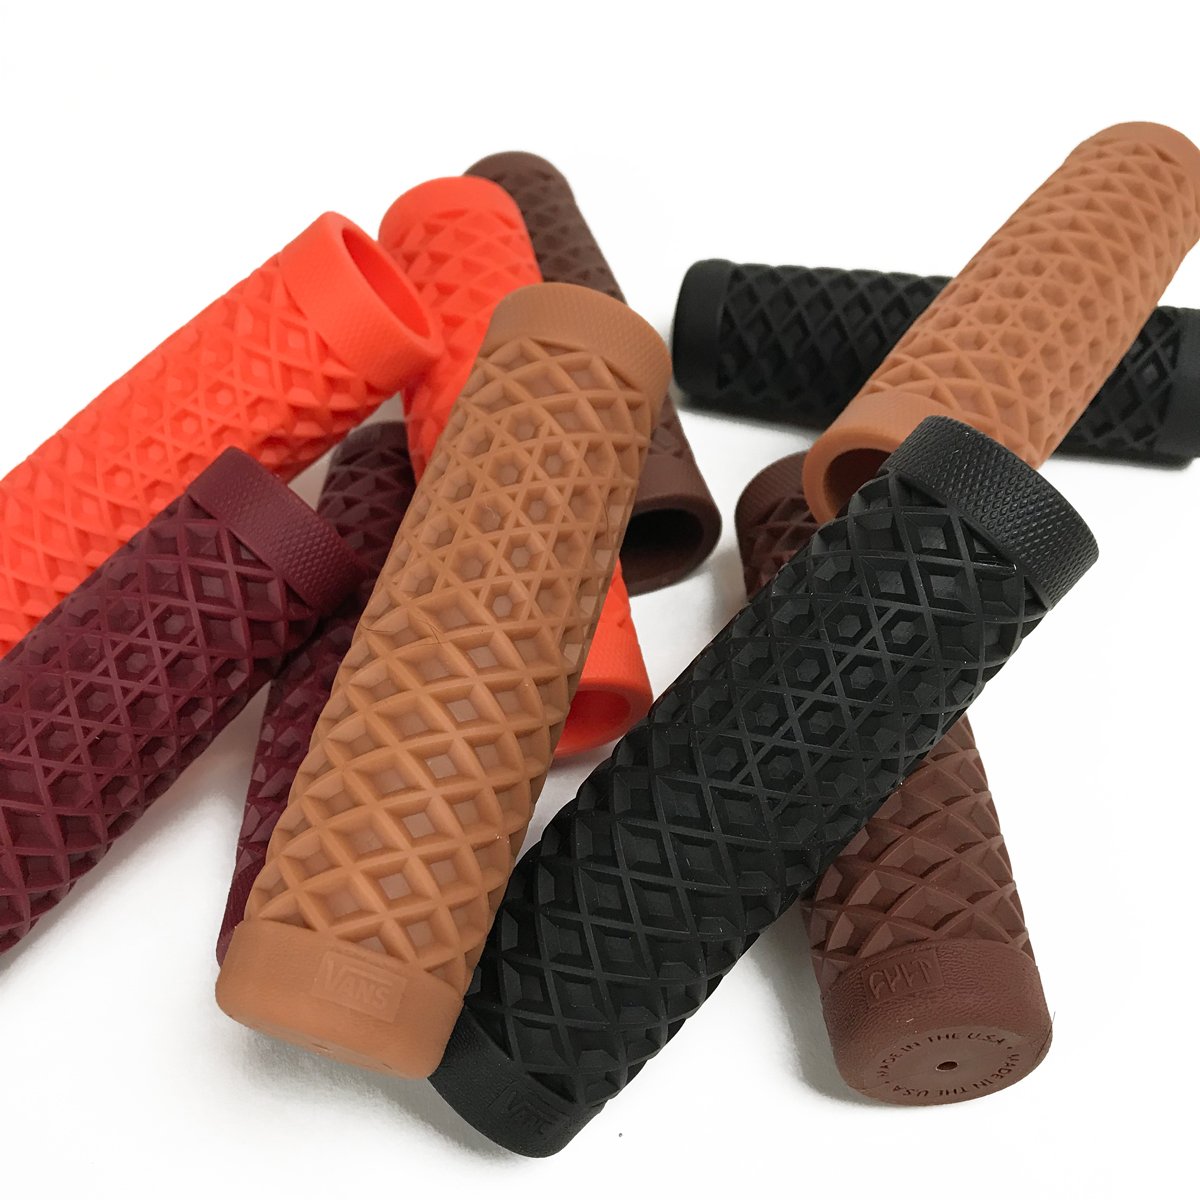 A group of different colored rubber grips, including the ODI Vans + Cult Motorcycle Grips - 7/8" Orange, on a white surface.